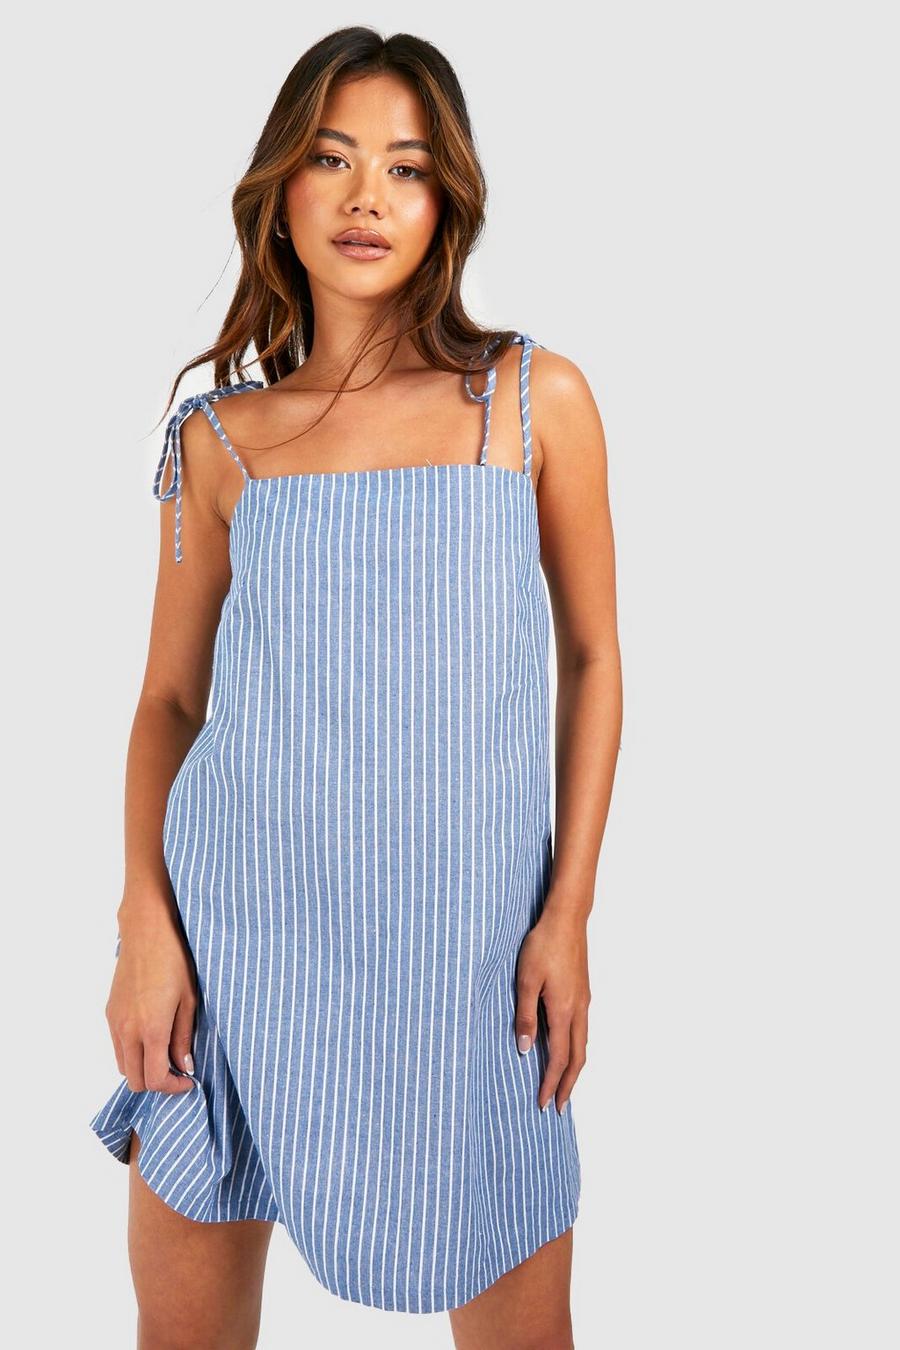 Striped dresses will effortlessly update your wardrobe in time for